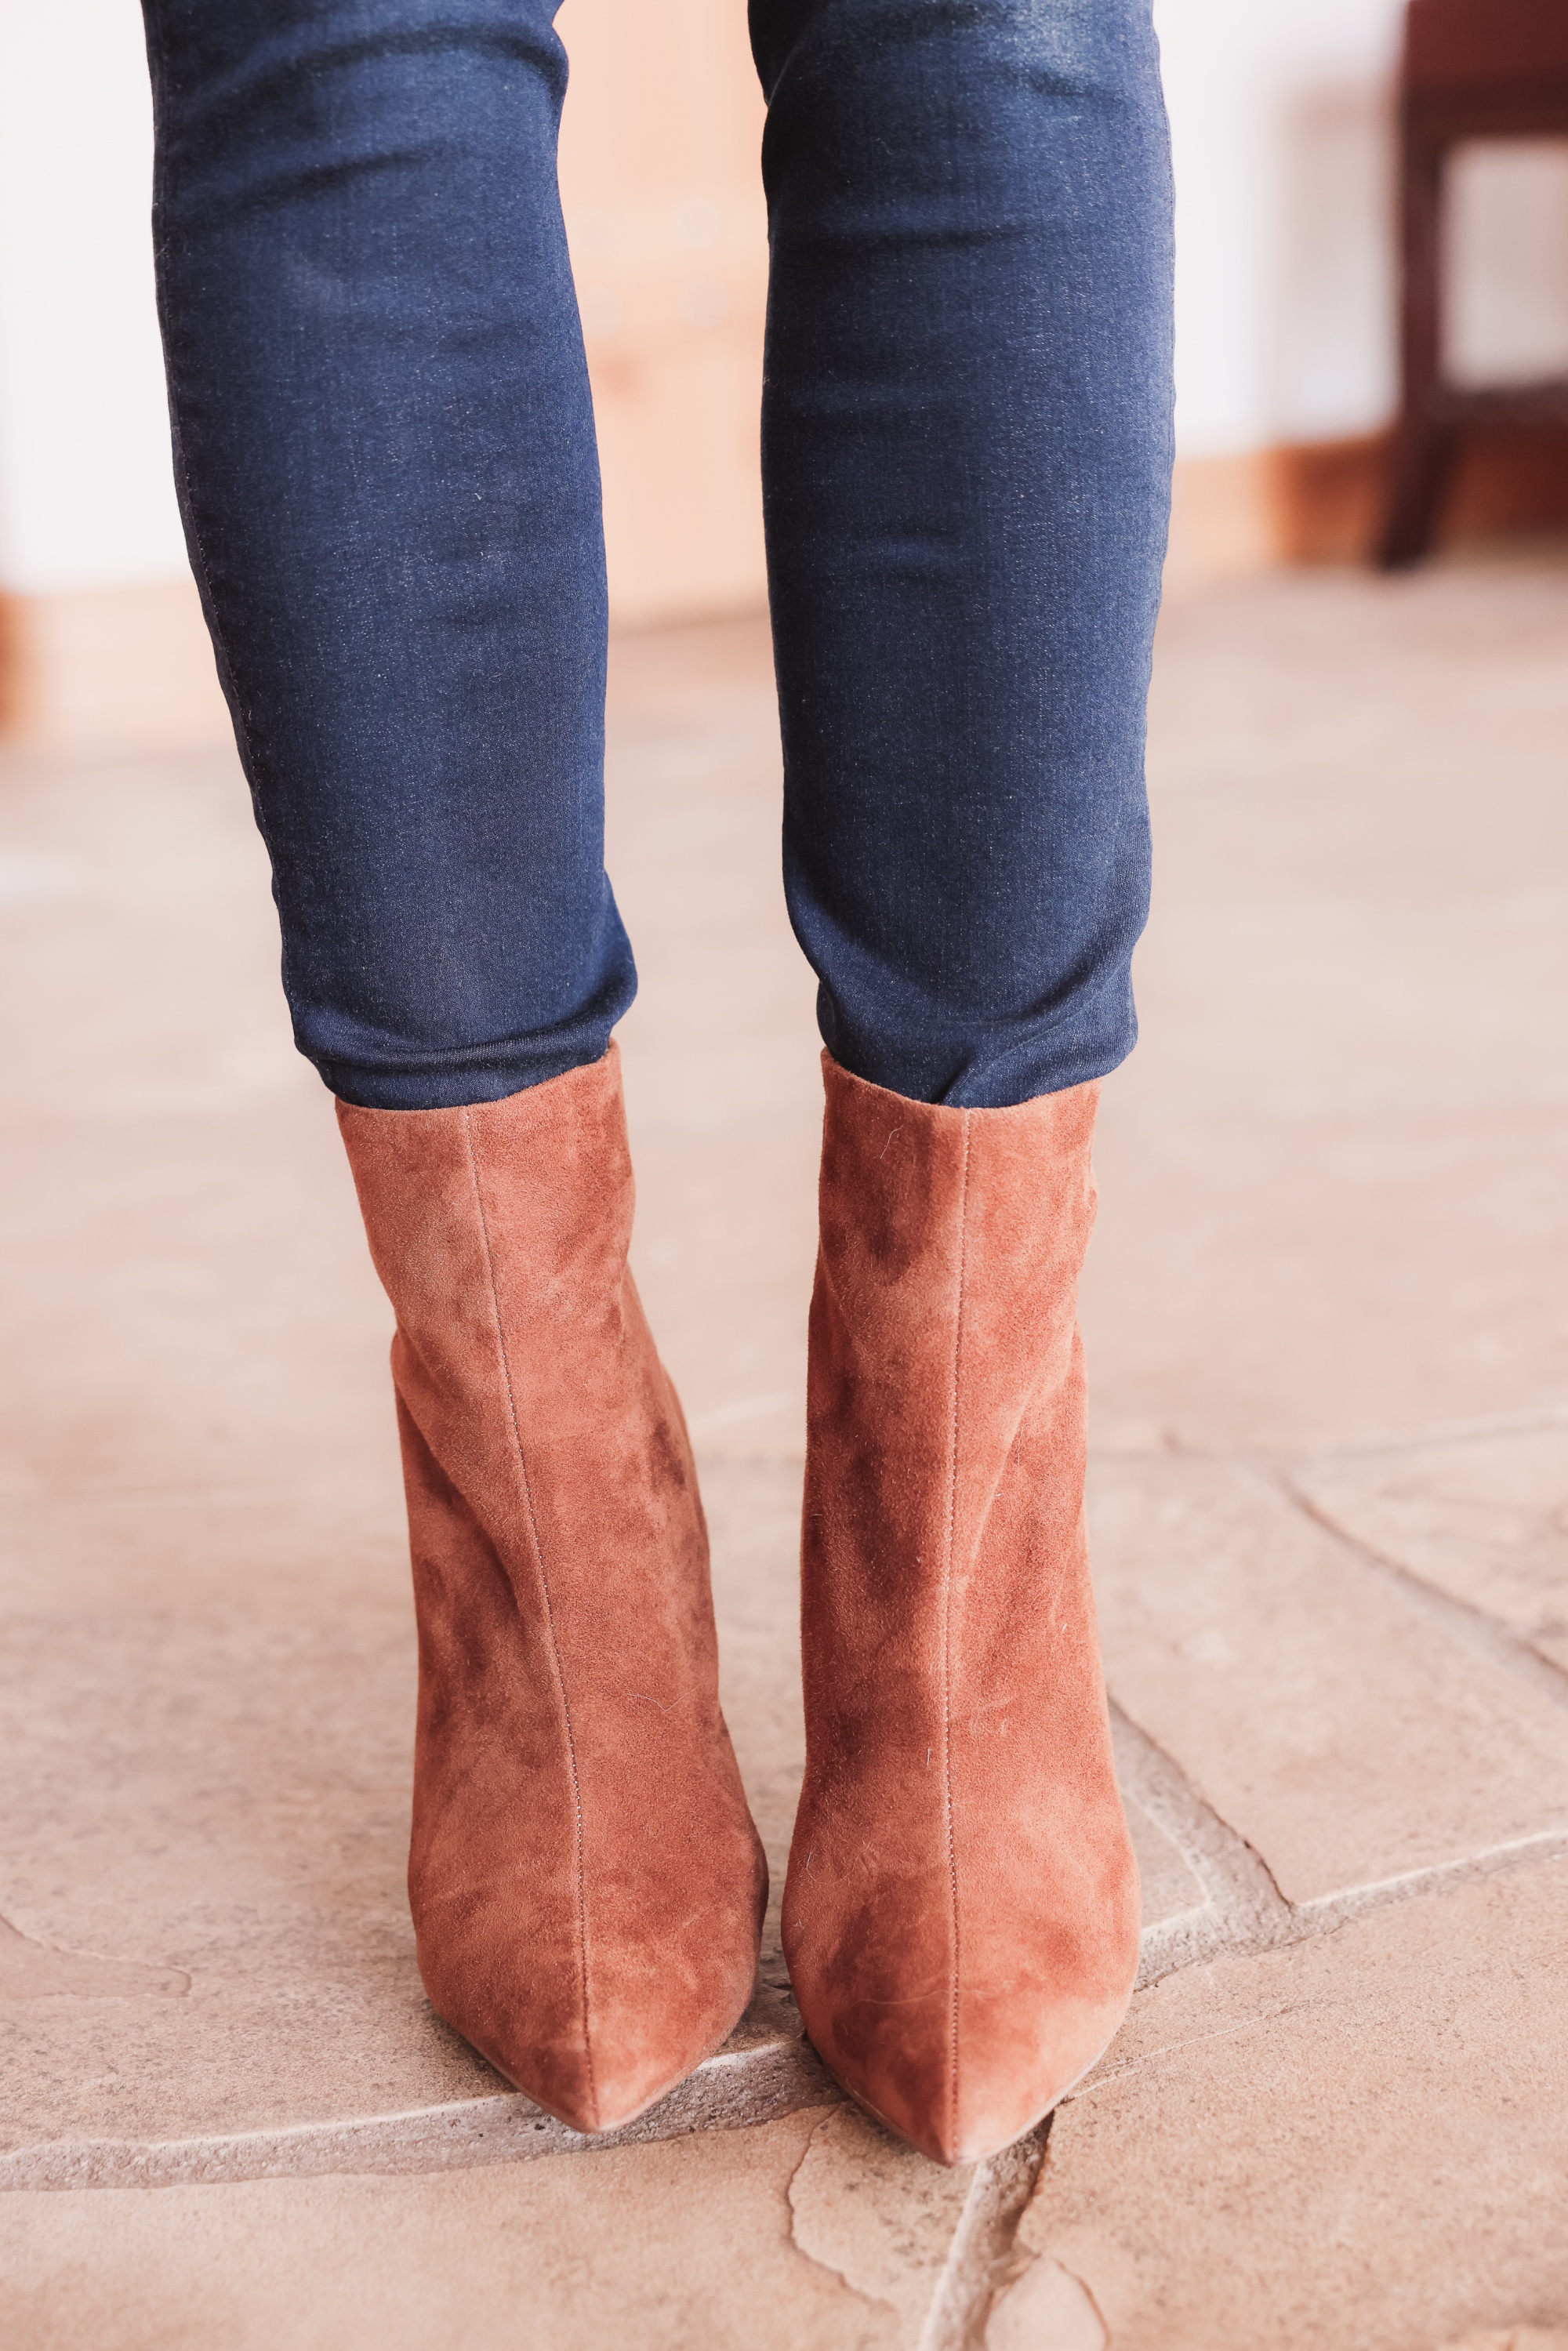 Best brown booties, Erin Busbee of Busbee wearing an ASTR the Label sculptural sleeve sweater with rag & bone skinny jeans and brown suede stiletto heel booties by Steve Madden from Nordstrom in Telluride, Colorado